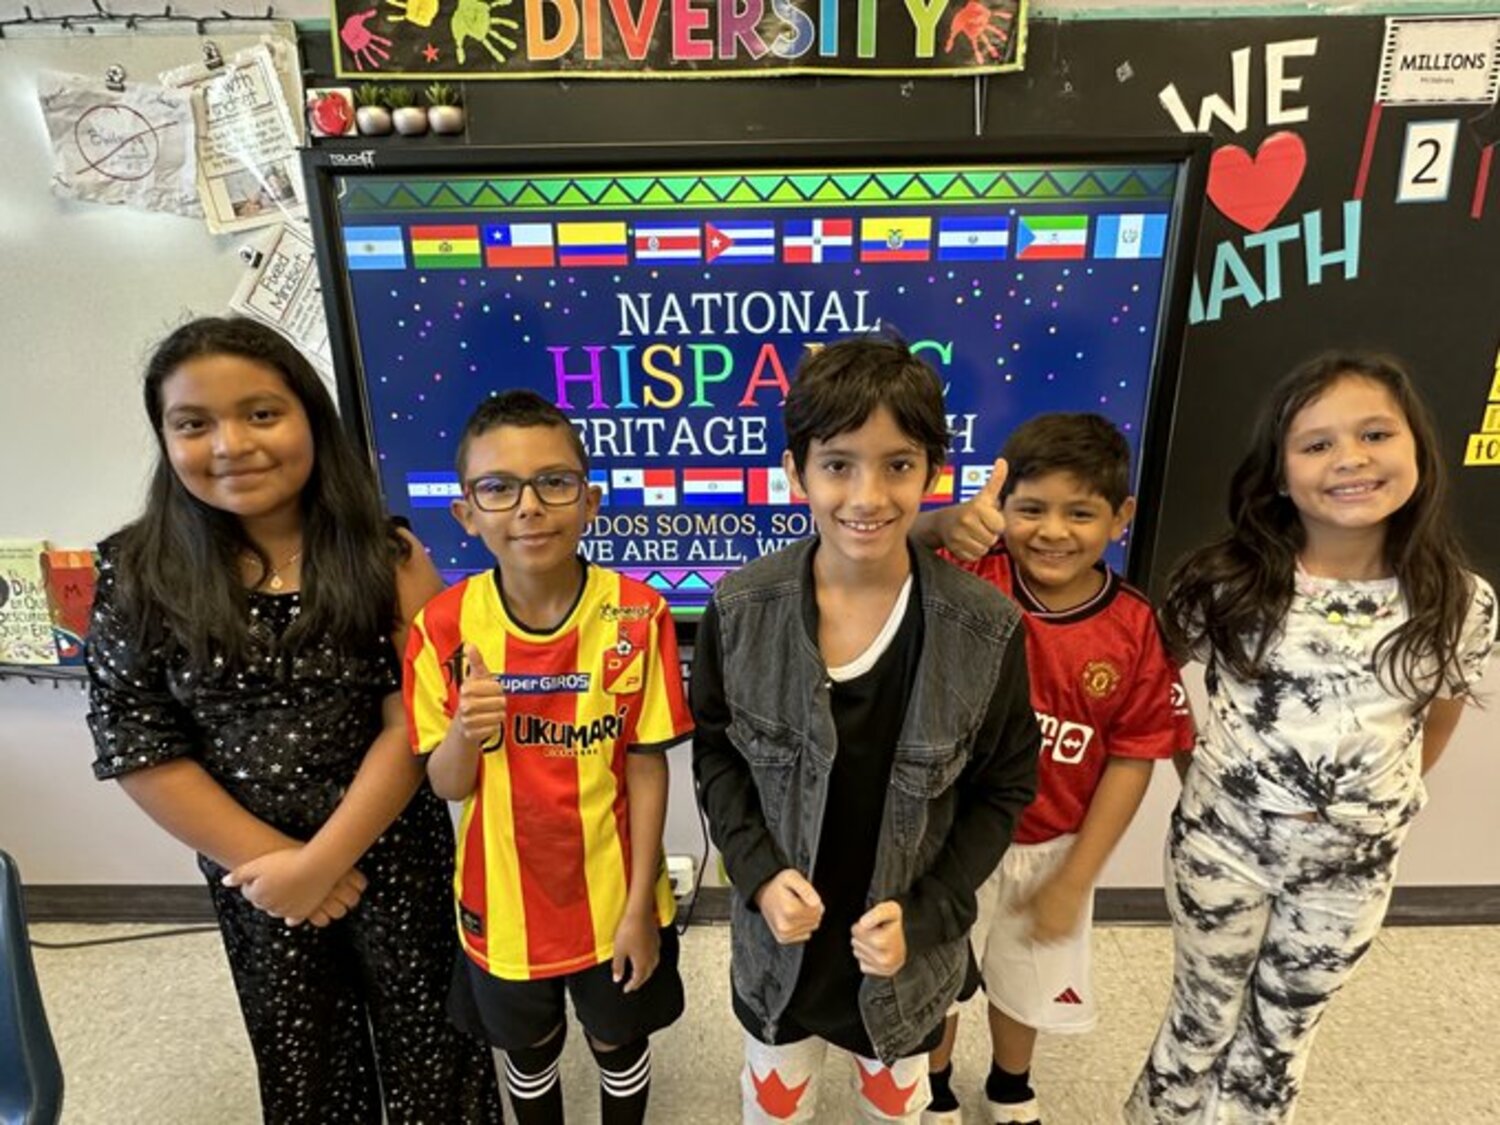 Hampton Bays Elementary School students are taking part in Hispanic Heritage Month by participating in various activities. COURTESY HAMPTON BAYS SCHOOL DISTRICT